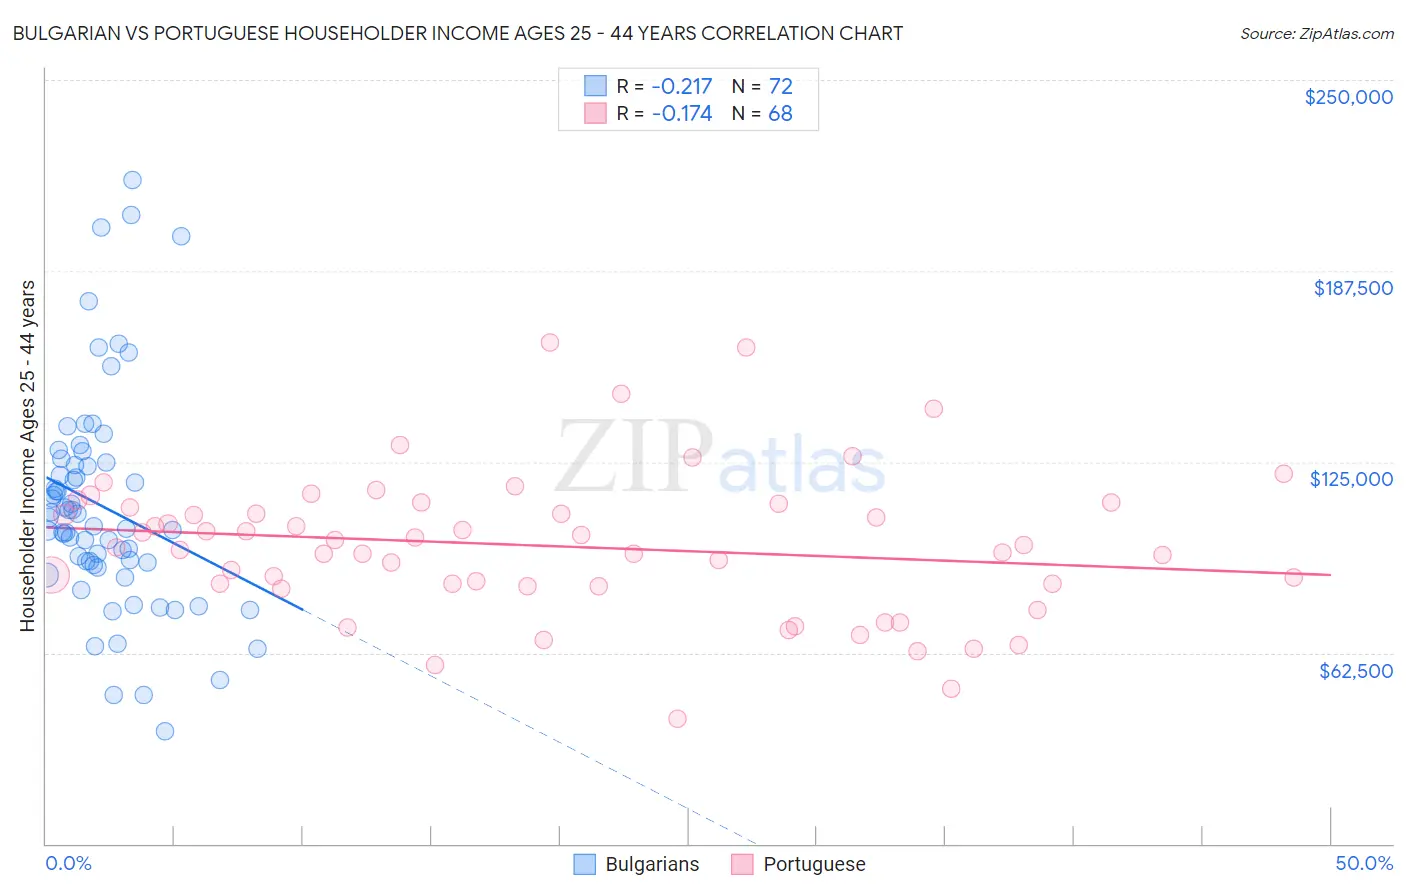 Bulgarian vs Portuguese Householder Income Ages 25 - 44 years